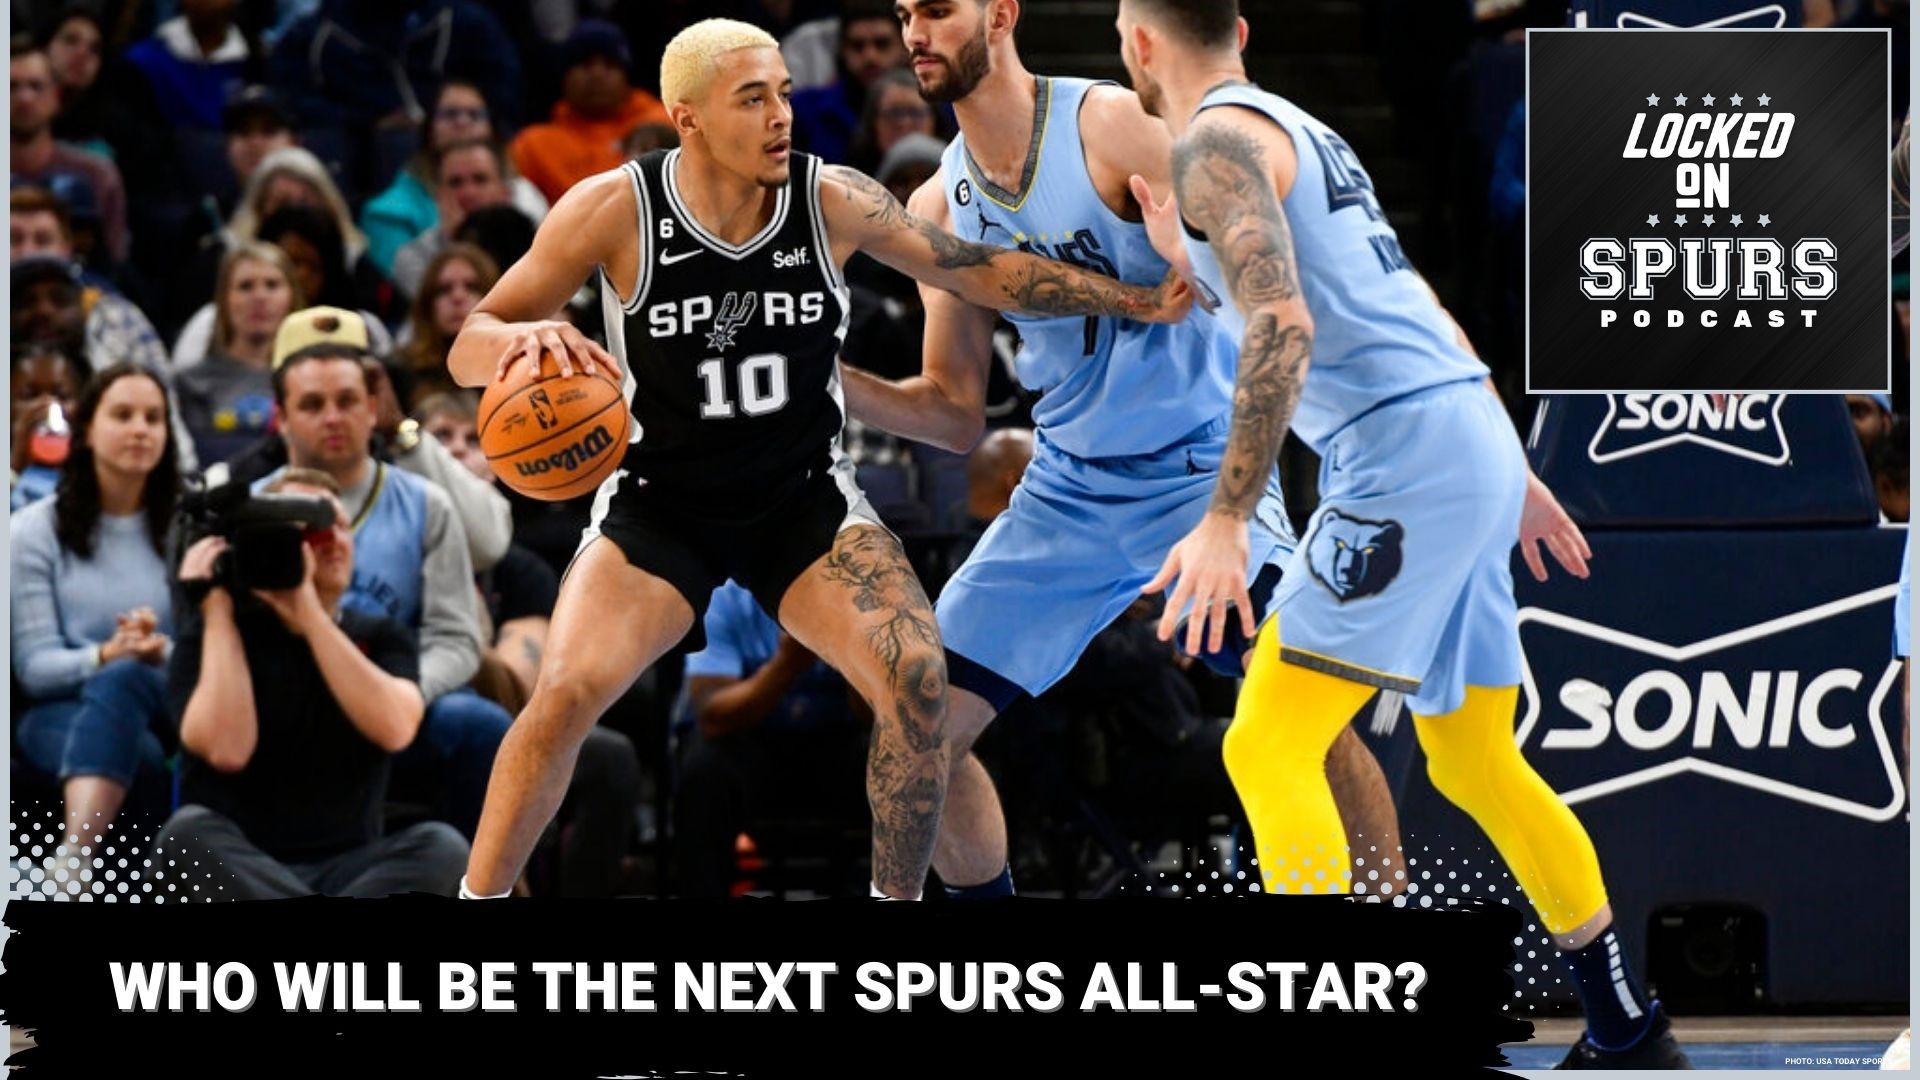 Does any player on the current Spurs roster have NBA All-Star potential?